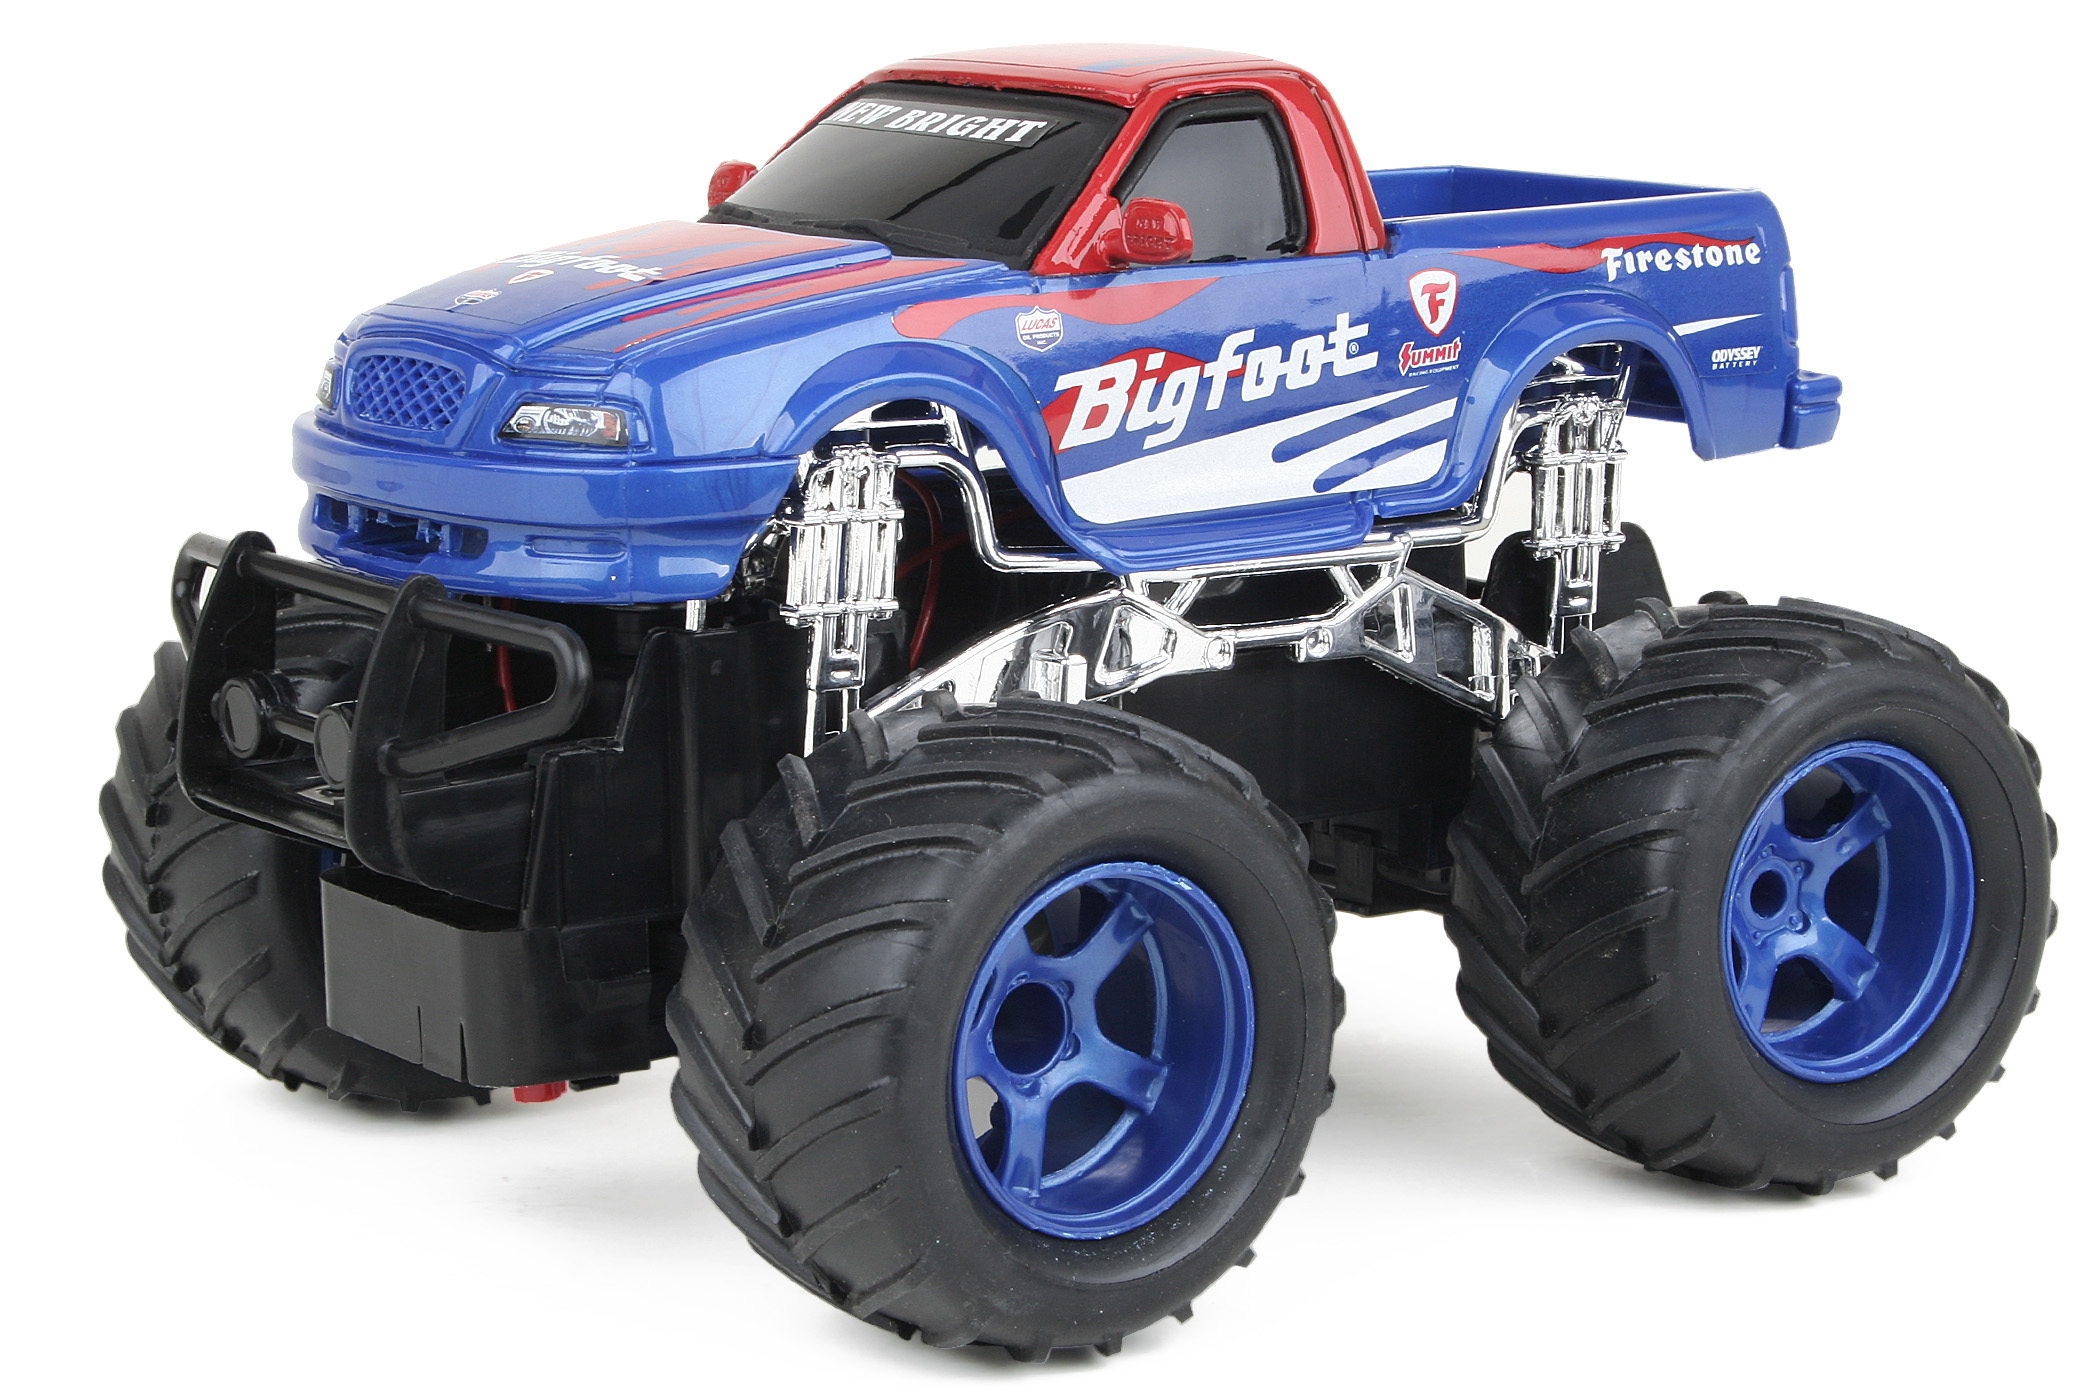 1:24 R/C Ford Classic Monster Truck